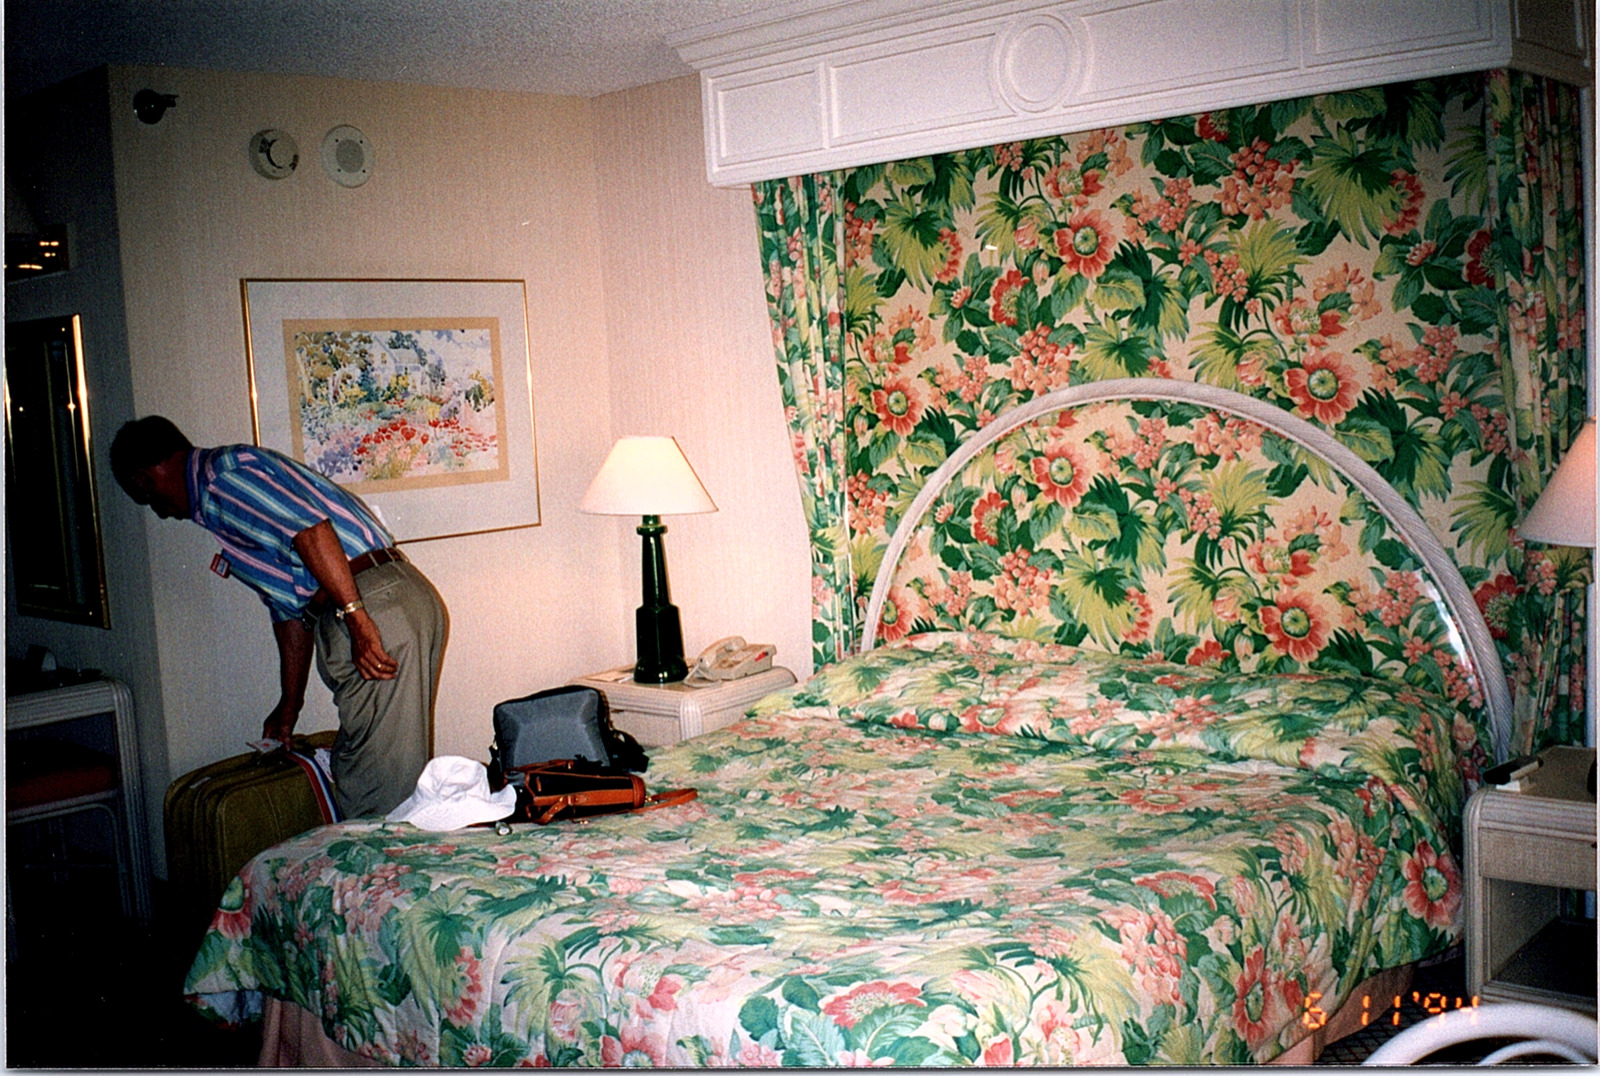 Vintage 1990s Found Photo - Man Unpacks His Luggage After Arriving At The Hotel